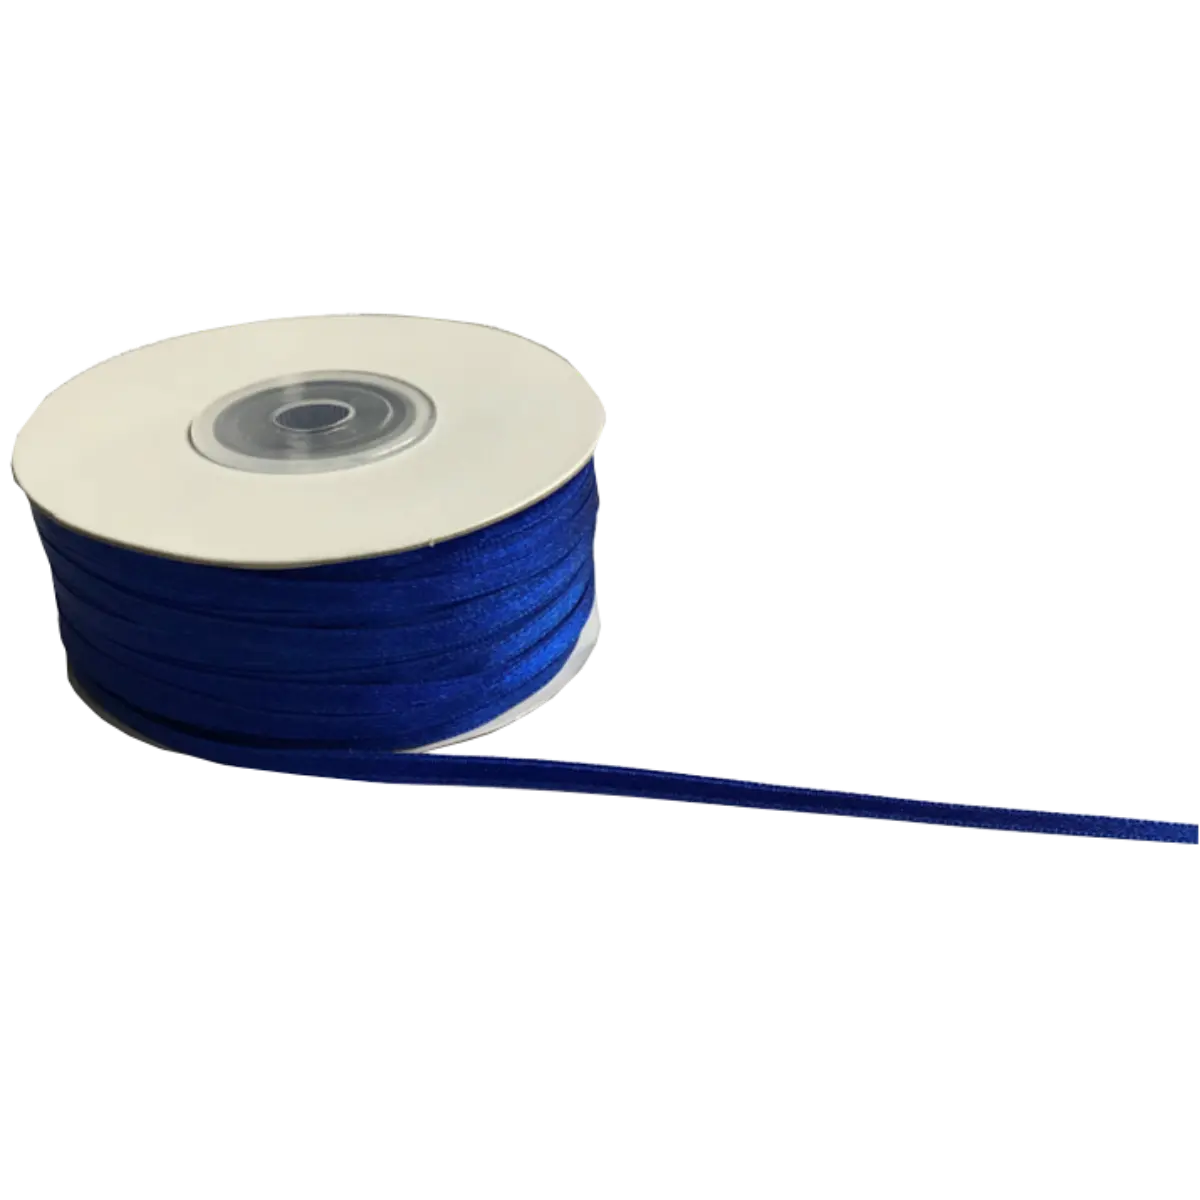 Royal Blue Double Sided Satin Ribbons - 3mm Wide By 100mts